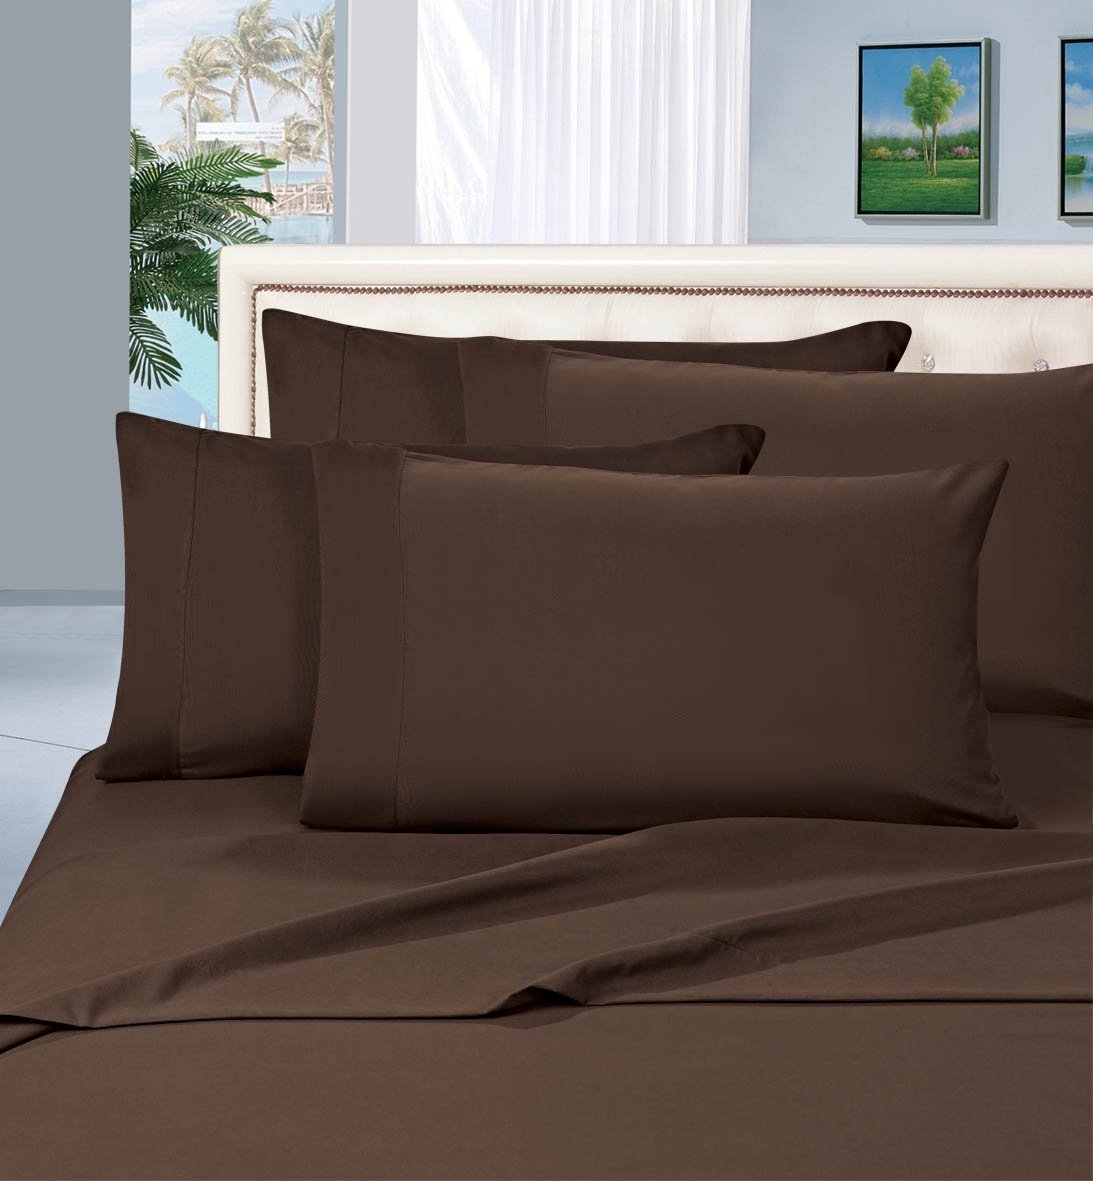 Elegant Comfort 1500 Series Wrinkle Resistant Egyptian Quality Hypoallergenic Ultra Soft Luxury 4-piece Bed Sheet Set, Queen, Chocolate